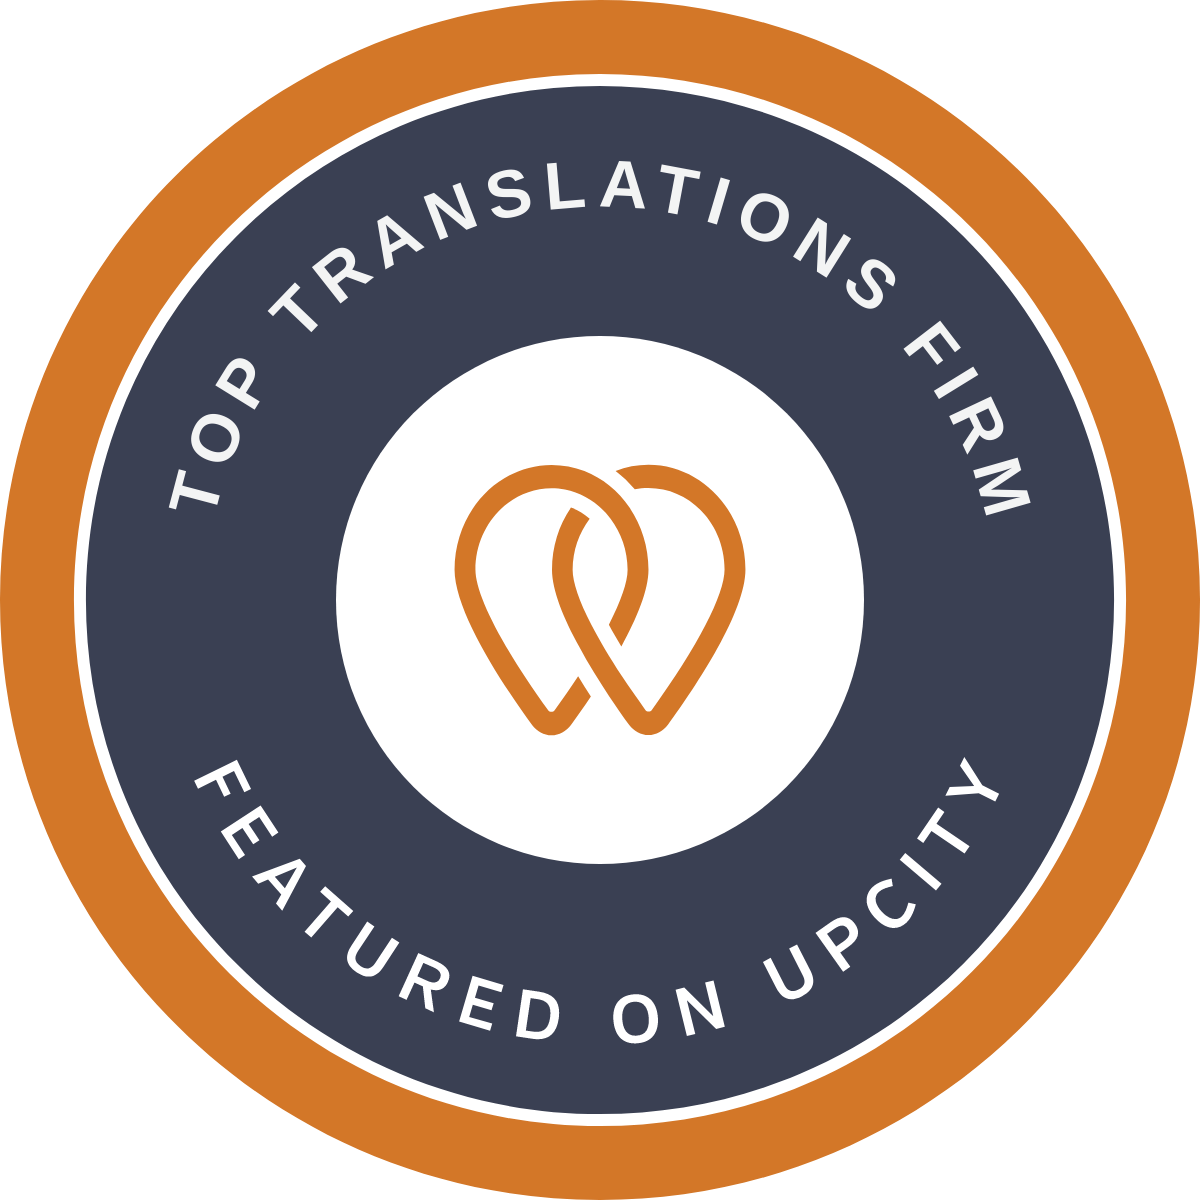 Upcity badge with Top Translations Firm award